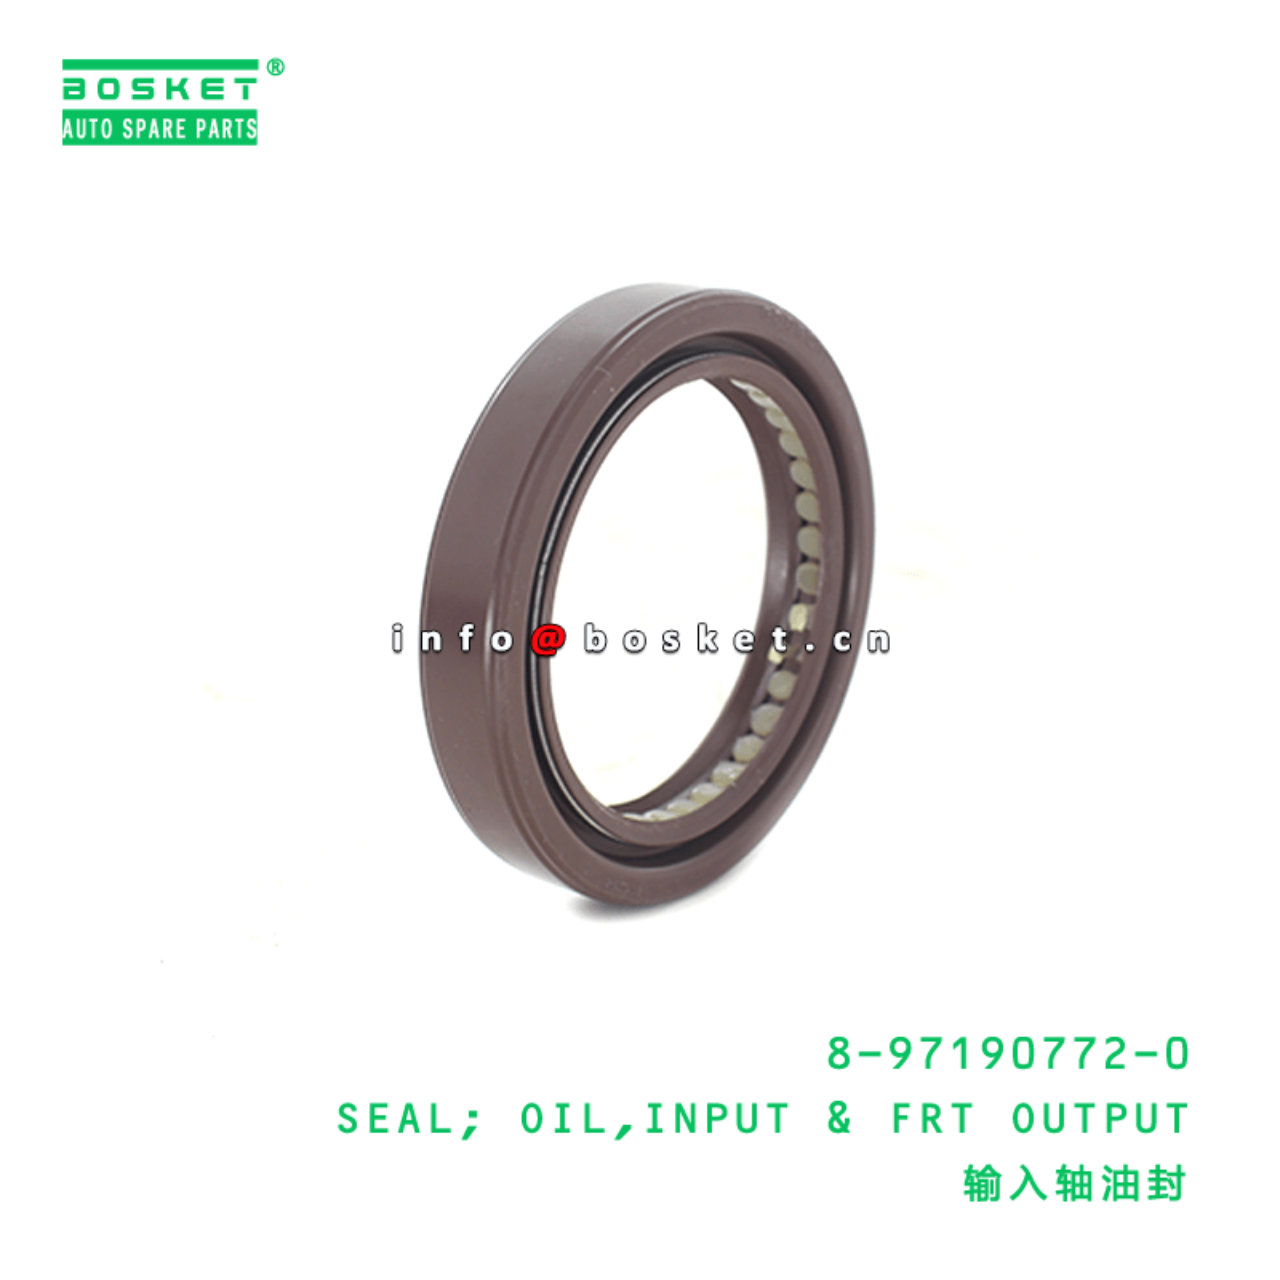  8-97190772-0 Input & Front Output Oil Seal 8971907720 Suitable for ISUZU NKR NPR